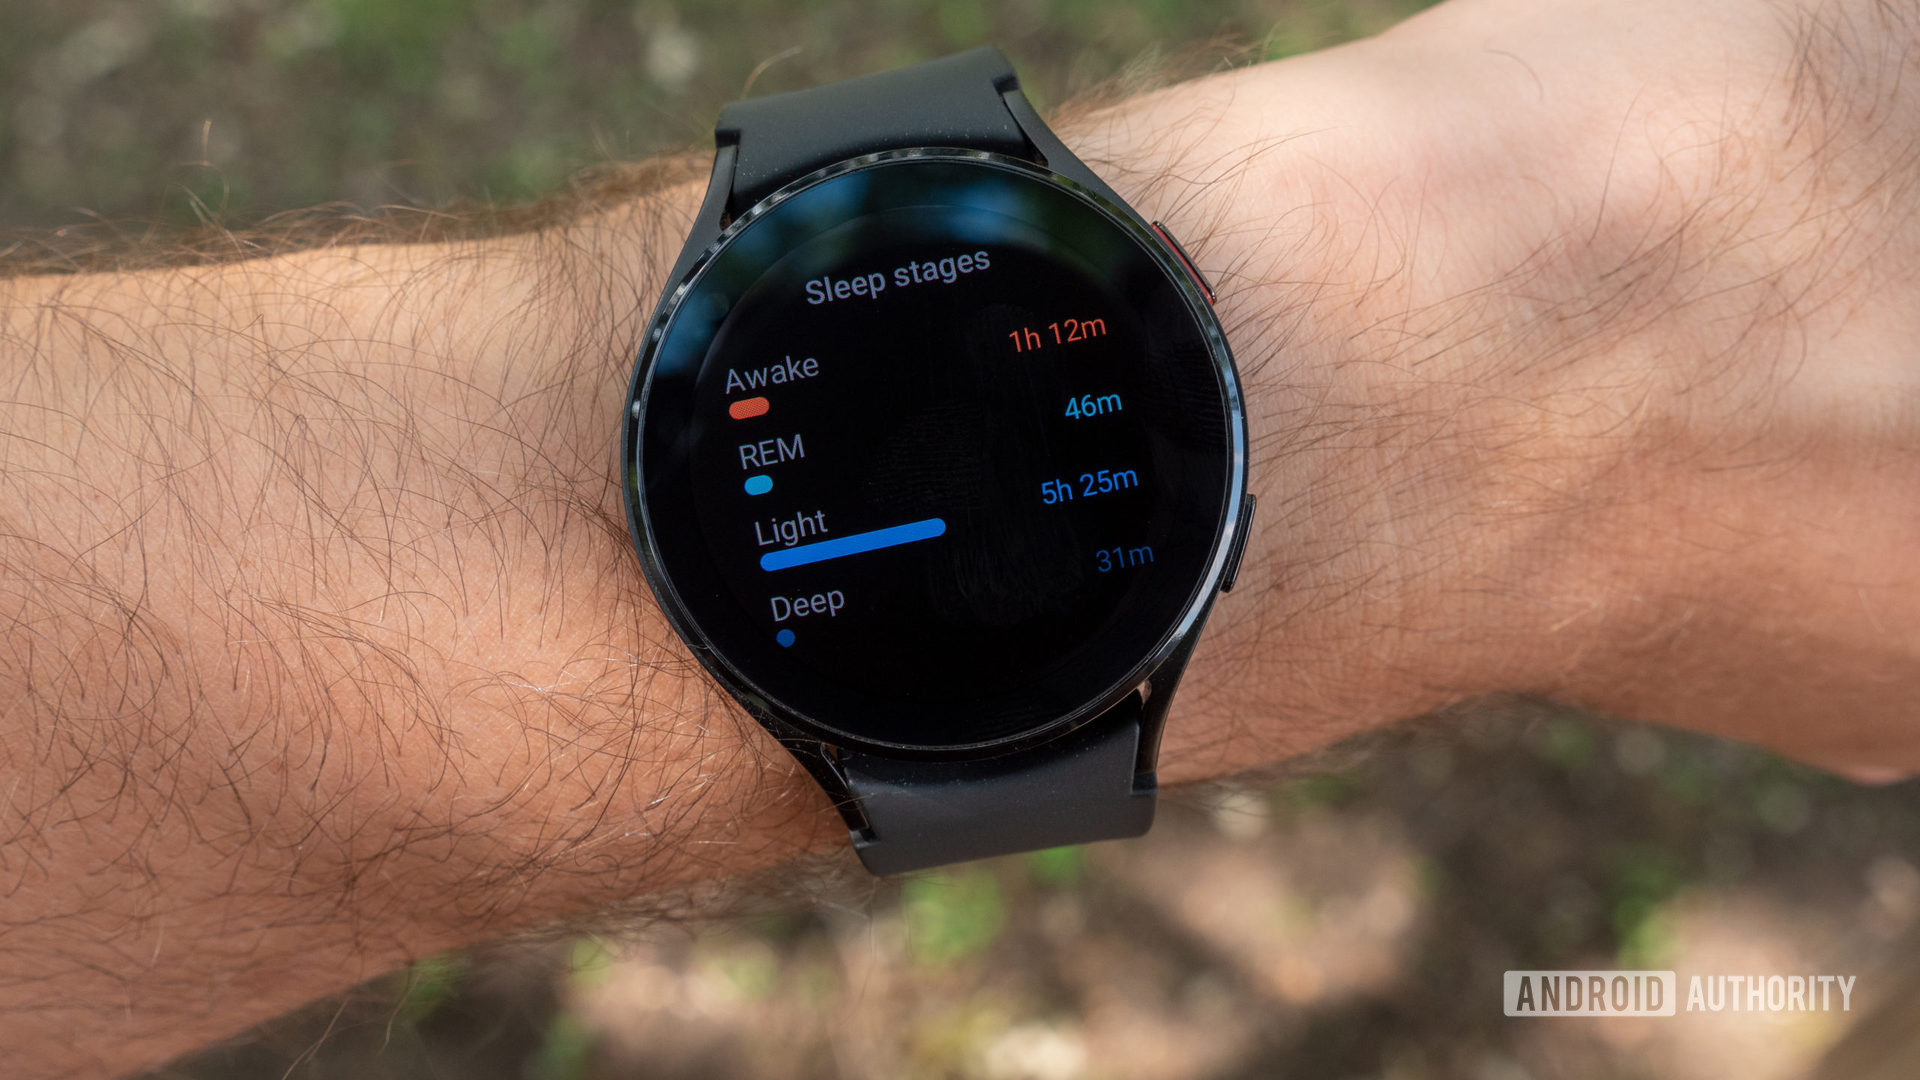 The Samsung Galaxy Watch 4 on a wrist showing sleep stages.